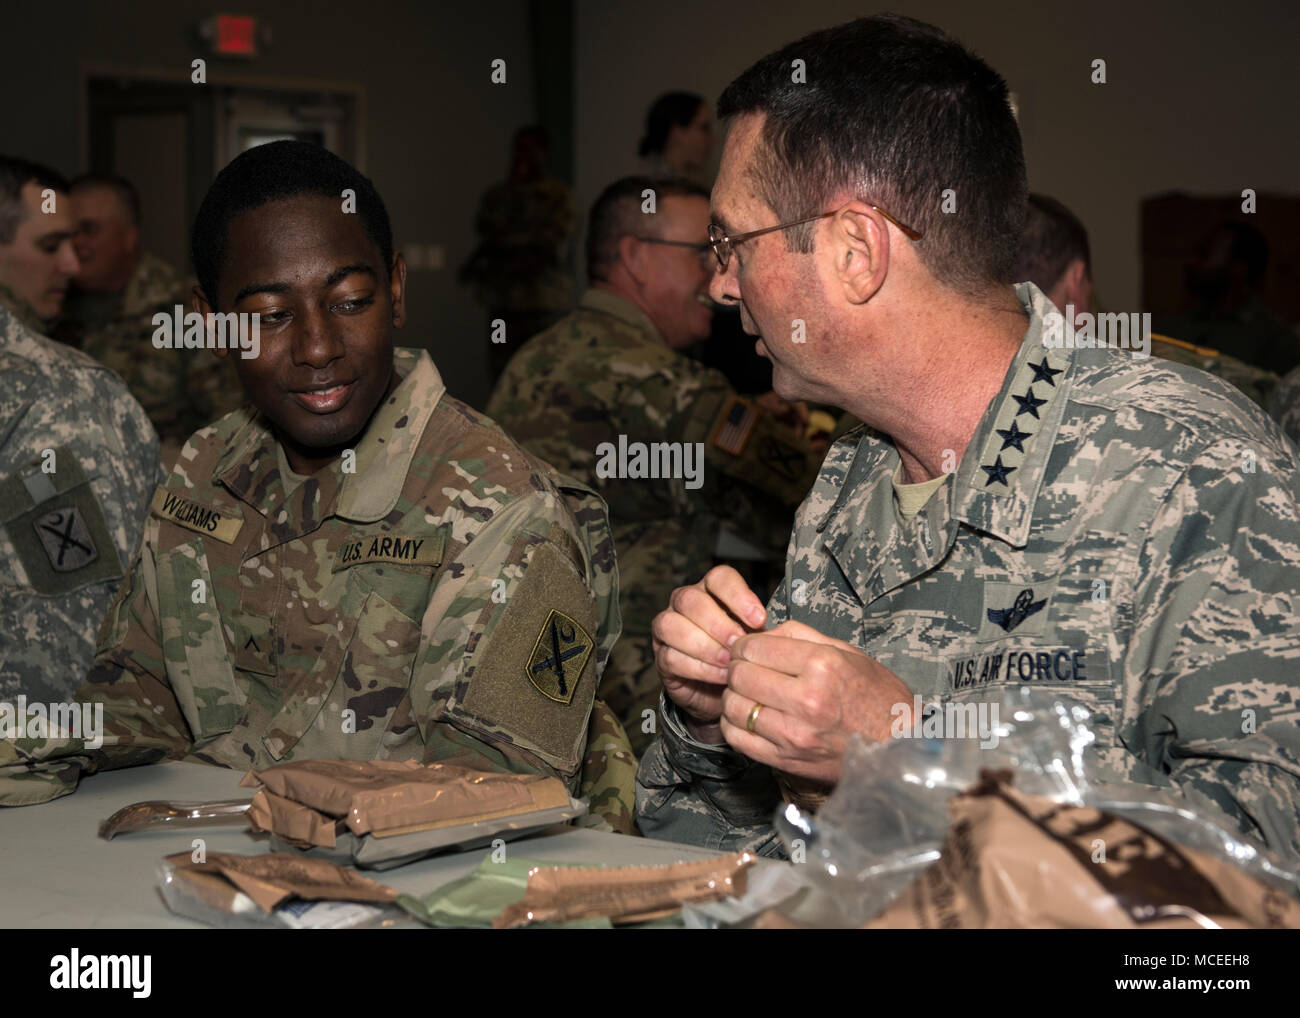 General Joseph L. Lengyel, Chief of the National Guard Bureau, has lunch with Pvt. Darryl Williams and Soldiers of the South Carolina Army National Guard who are participating in Guardian Response 18, April 14, 2018, North Vernon, Indiana. (U.S. Army National Guard photo by Sgt. Brian Calhoun, 108th Public Affairs Det.) Stock Photo